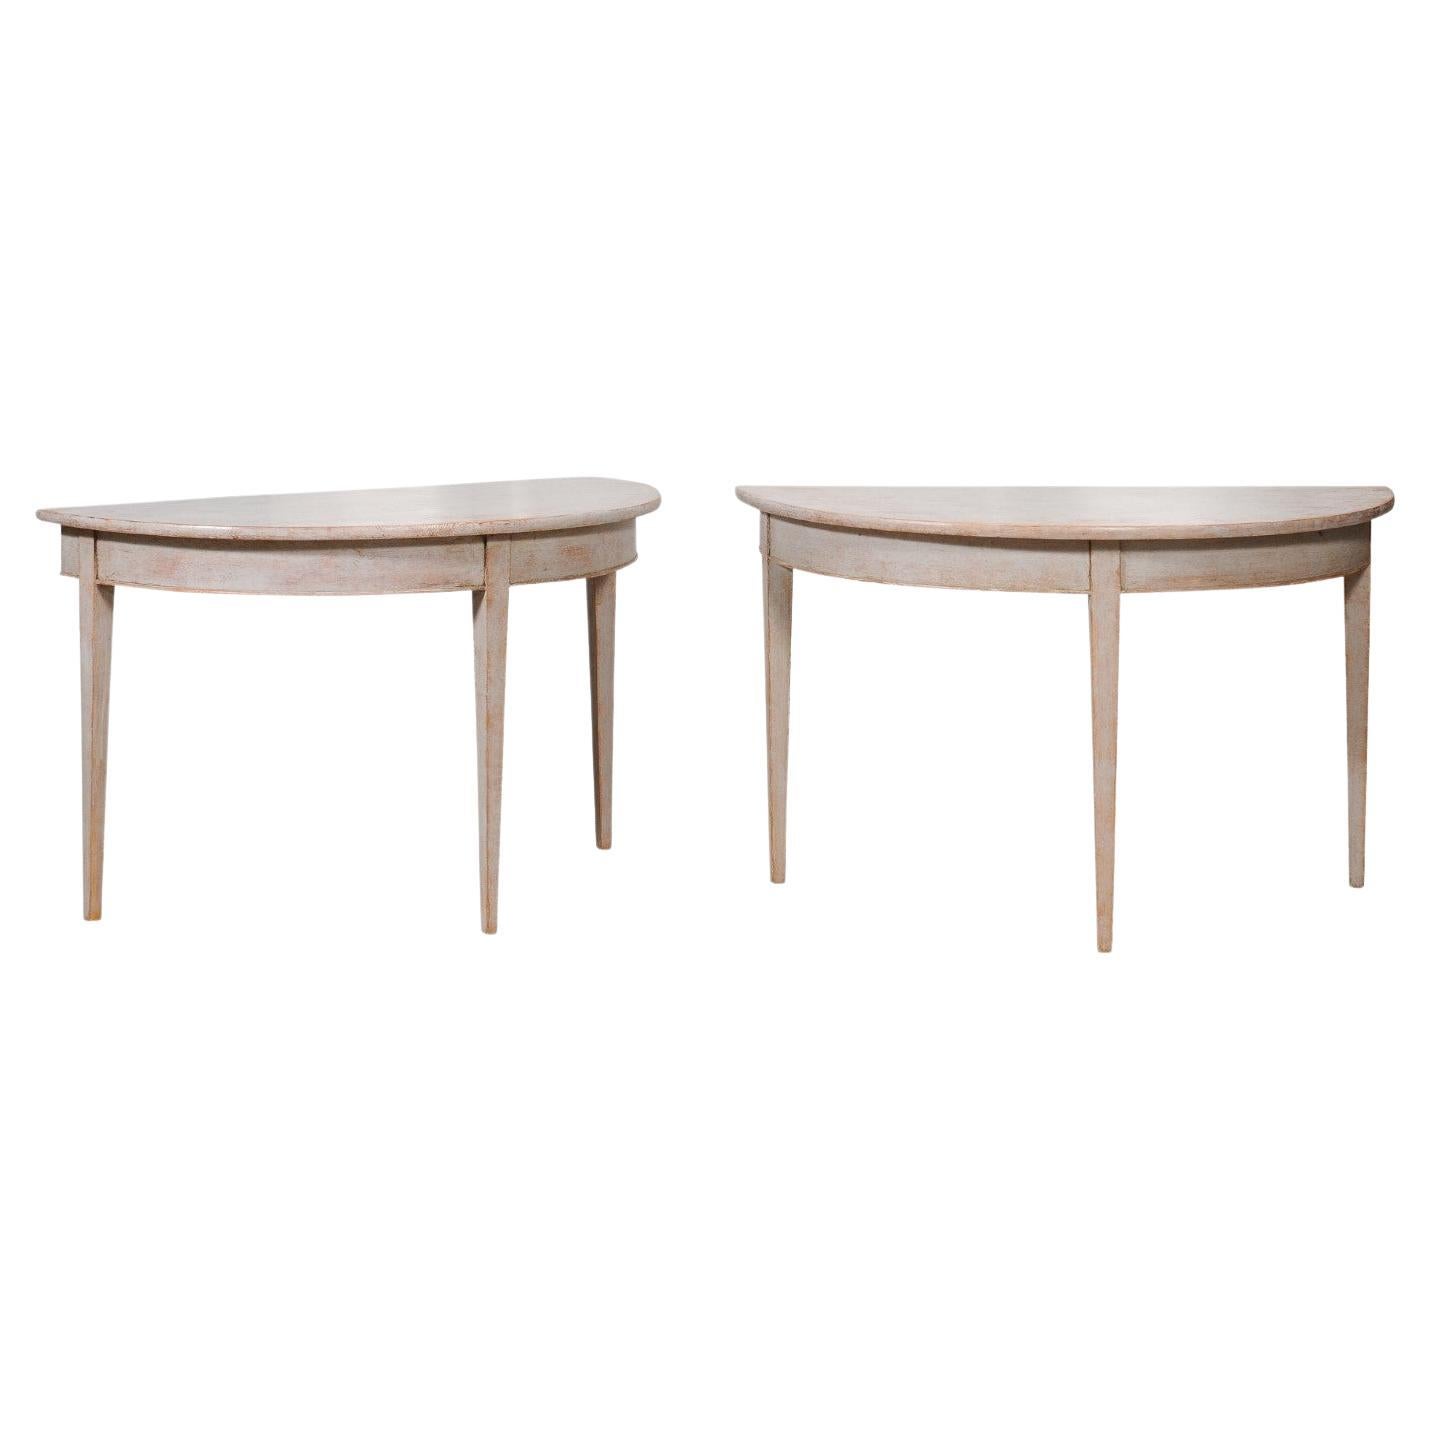 1860s Gustavian Style Swedish Painted Demi-Lune Tables with Tapered Legs